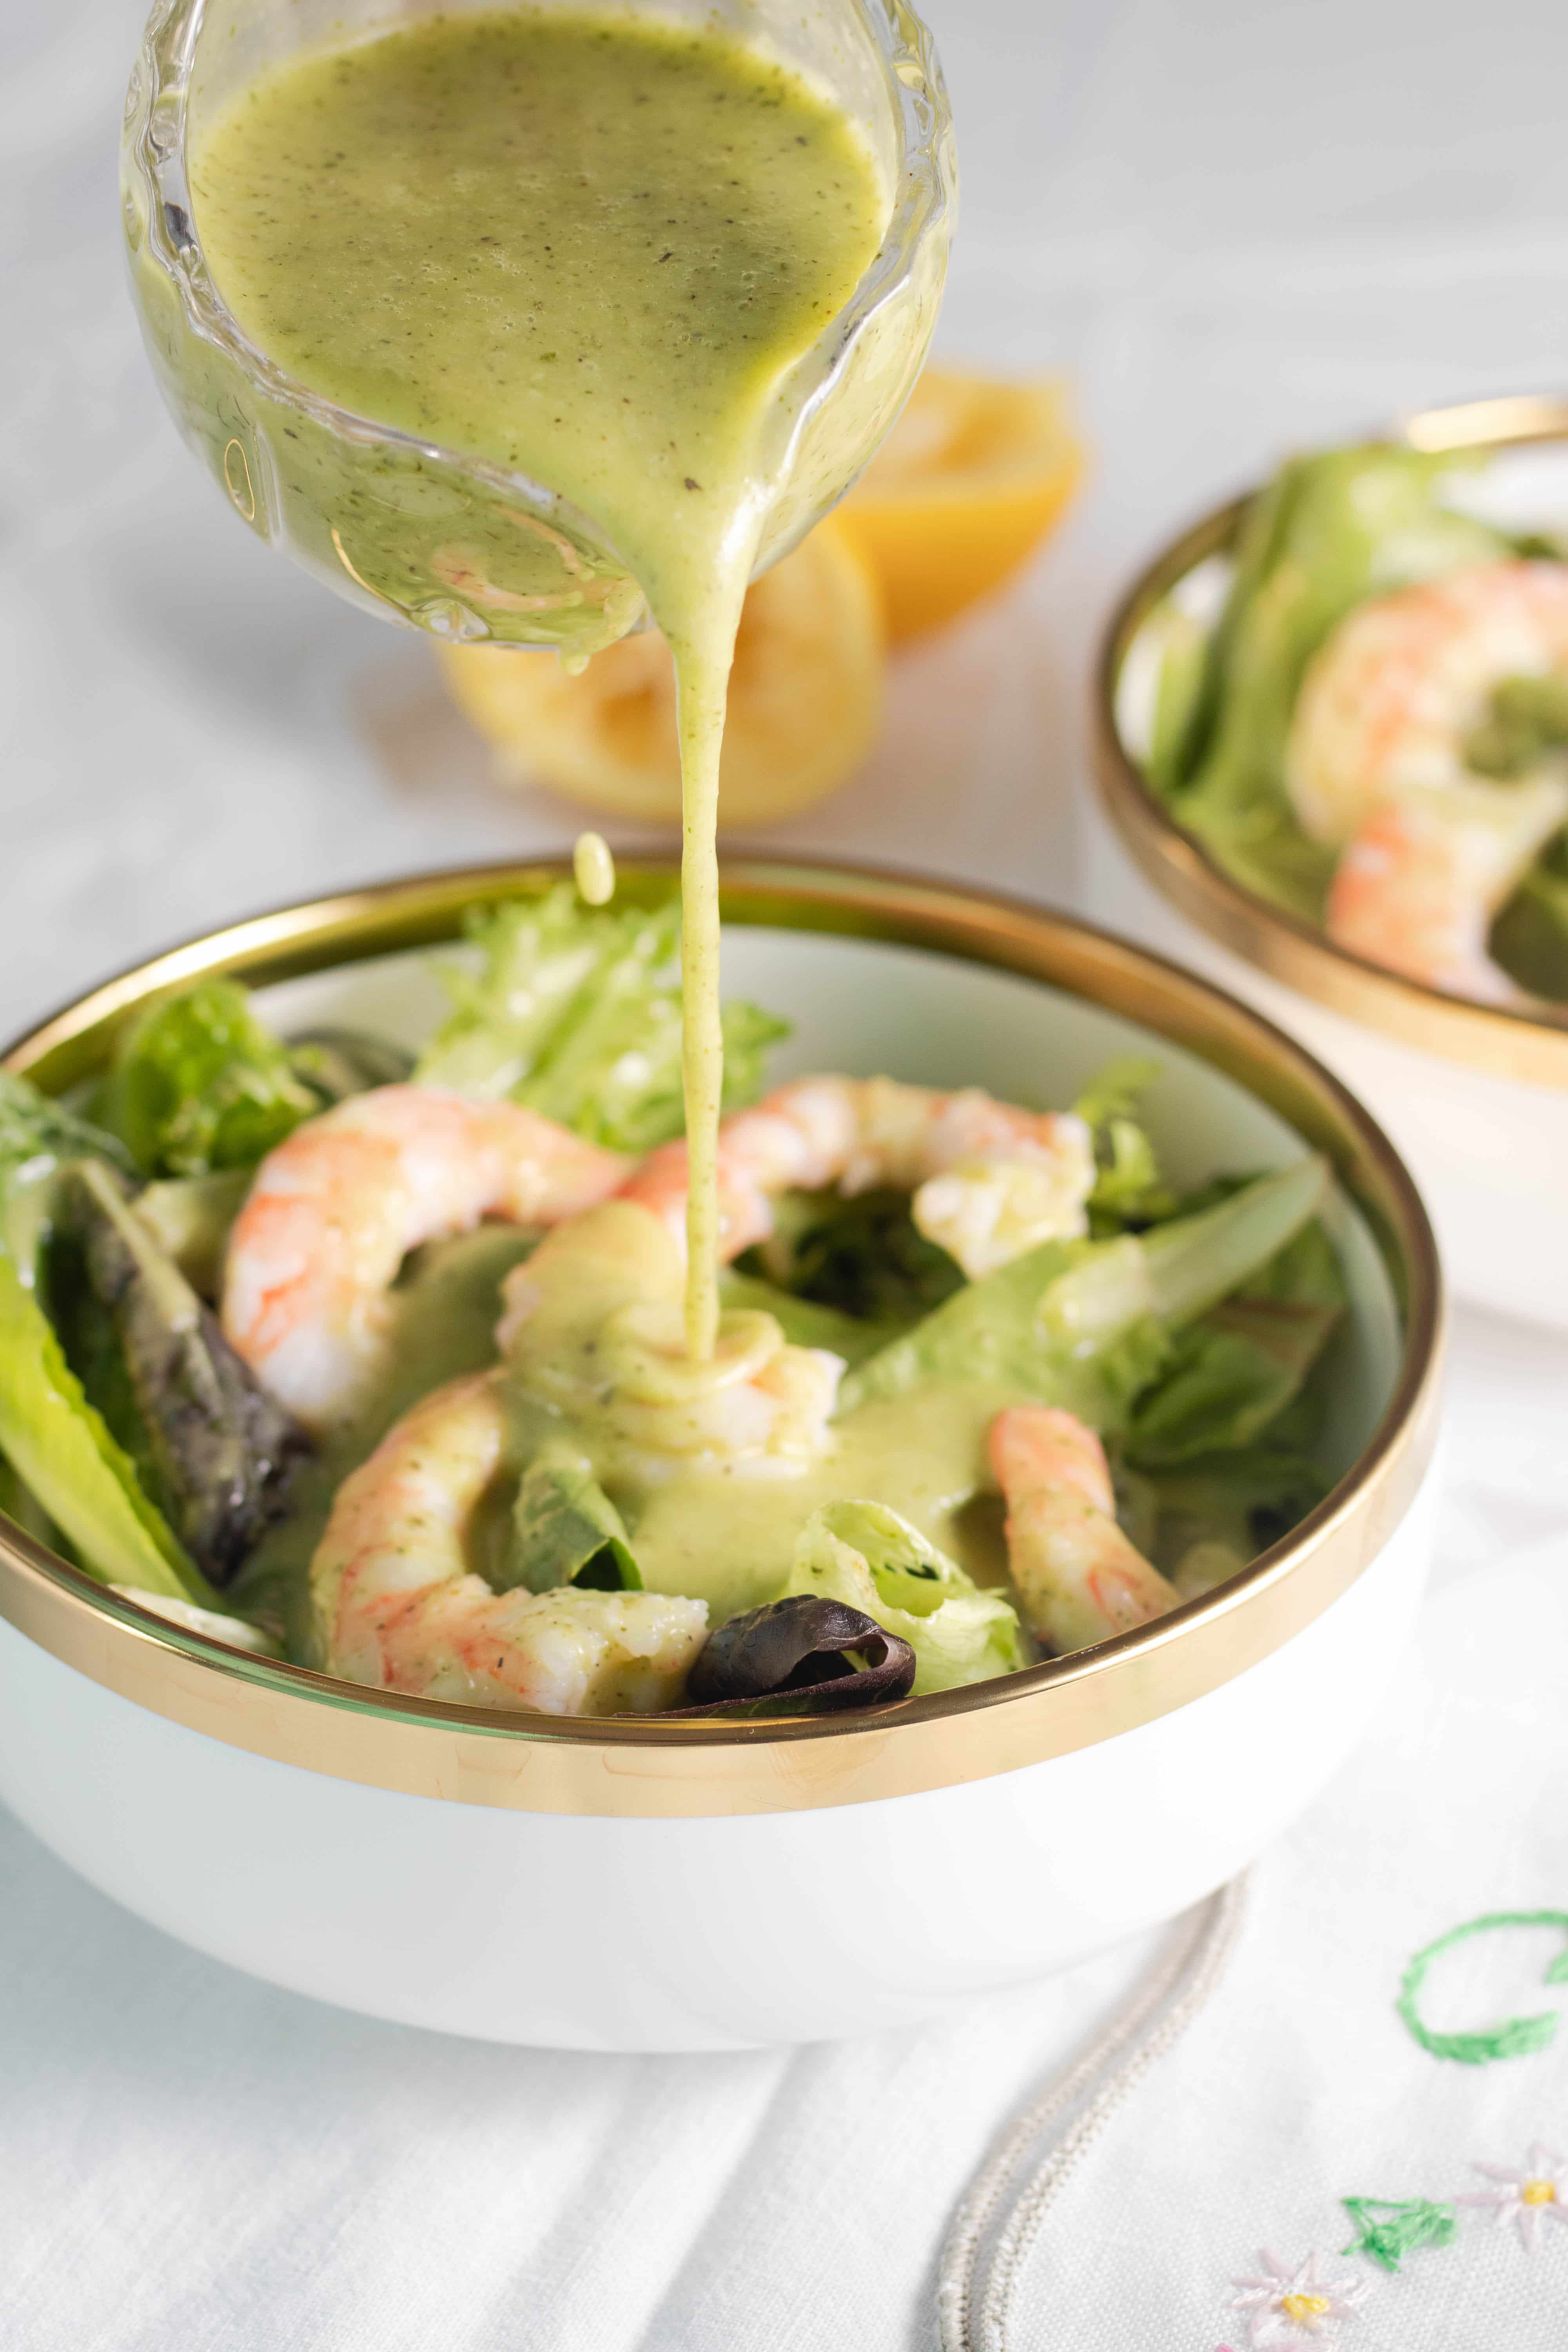 Low carb salad dressing on a salad with shrimp.